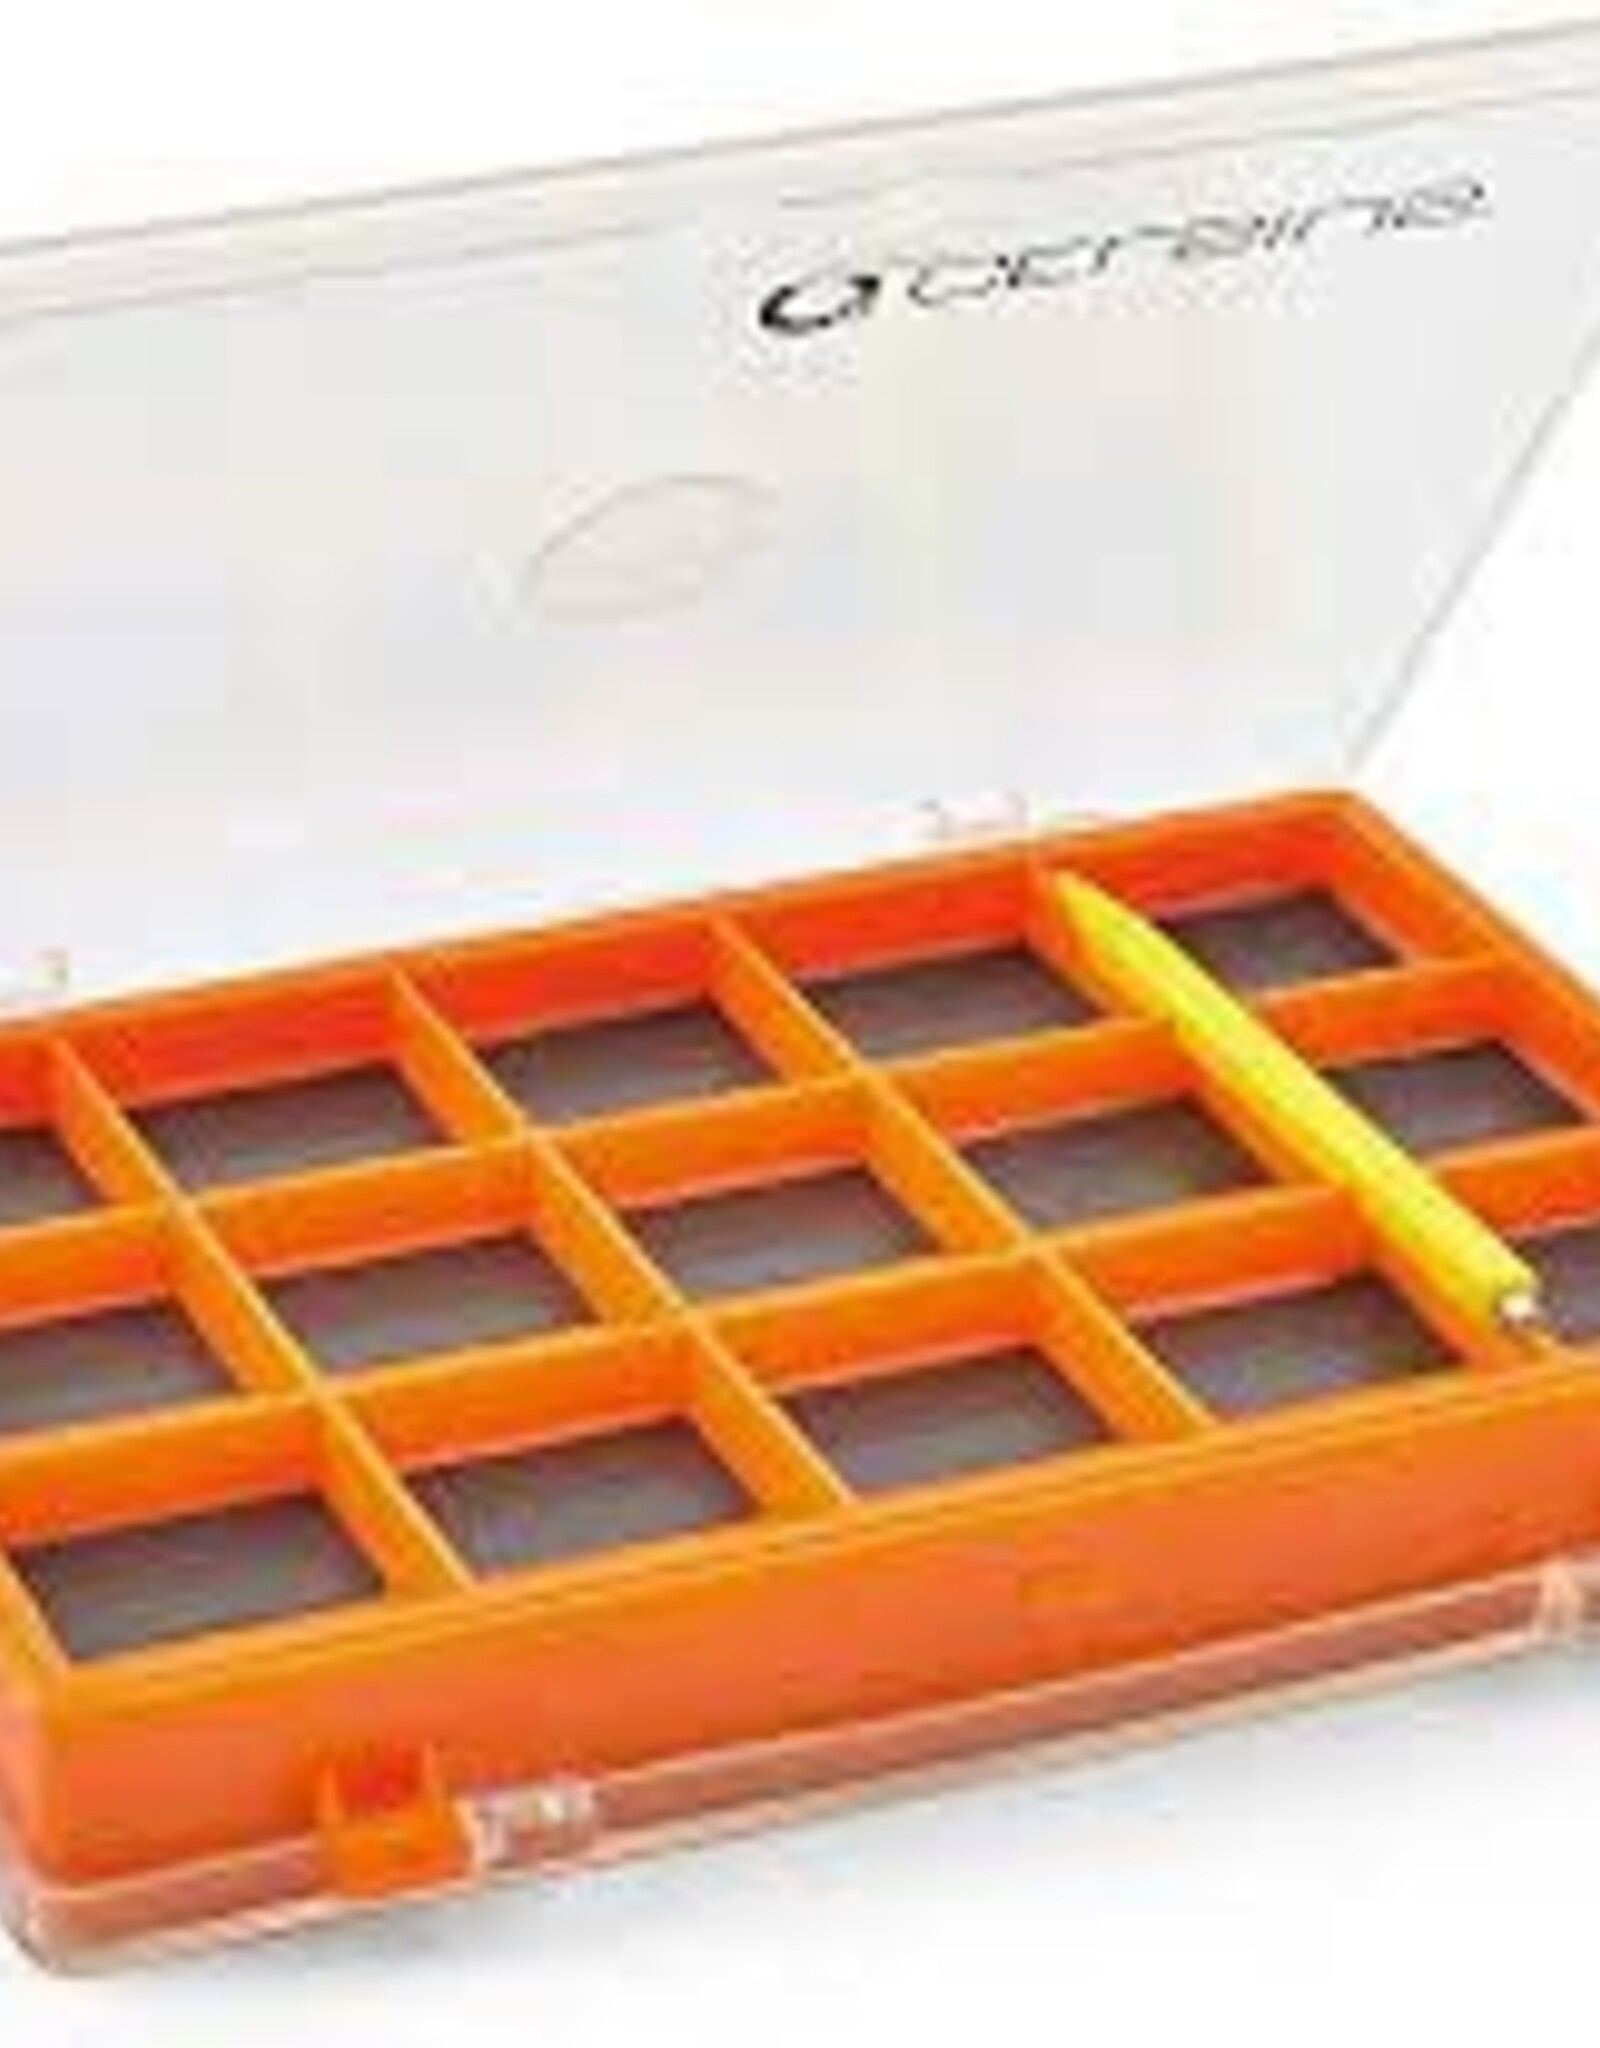 Celsius Ice Gear Magnetic Jig Box